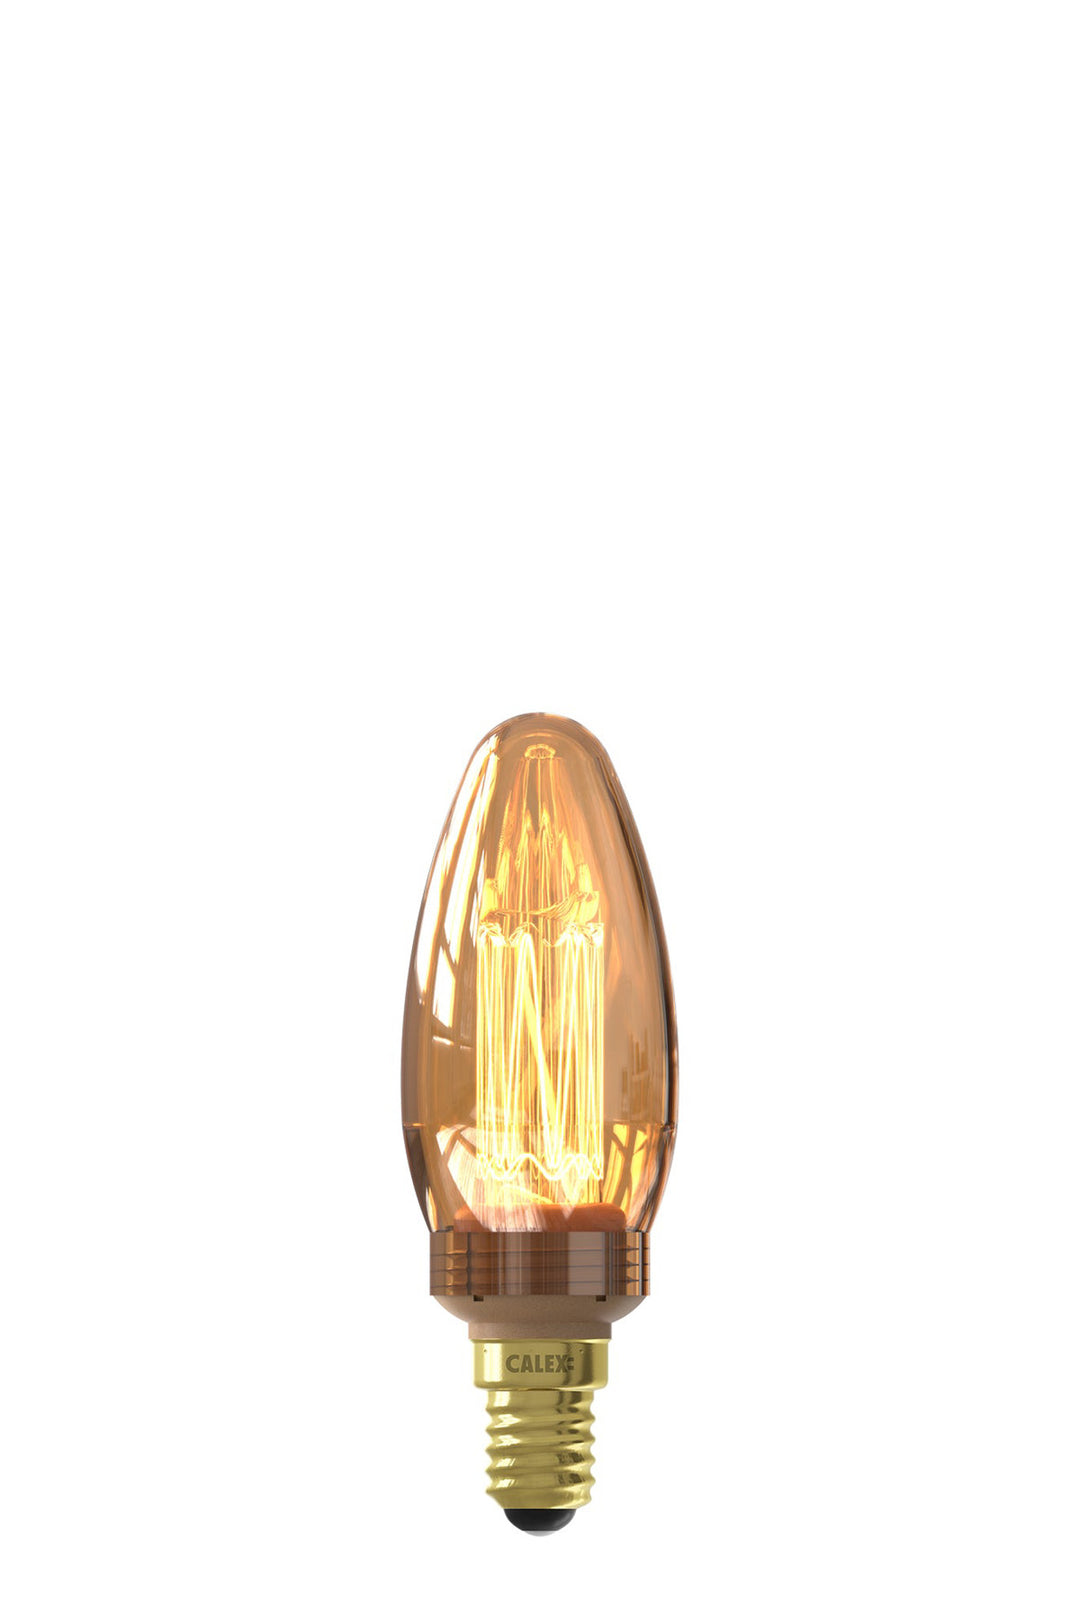 Calex LED Glass Fibre Candle C35 Gold, E14, Dimmable with LED Dimmer 1201001600